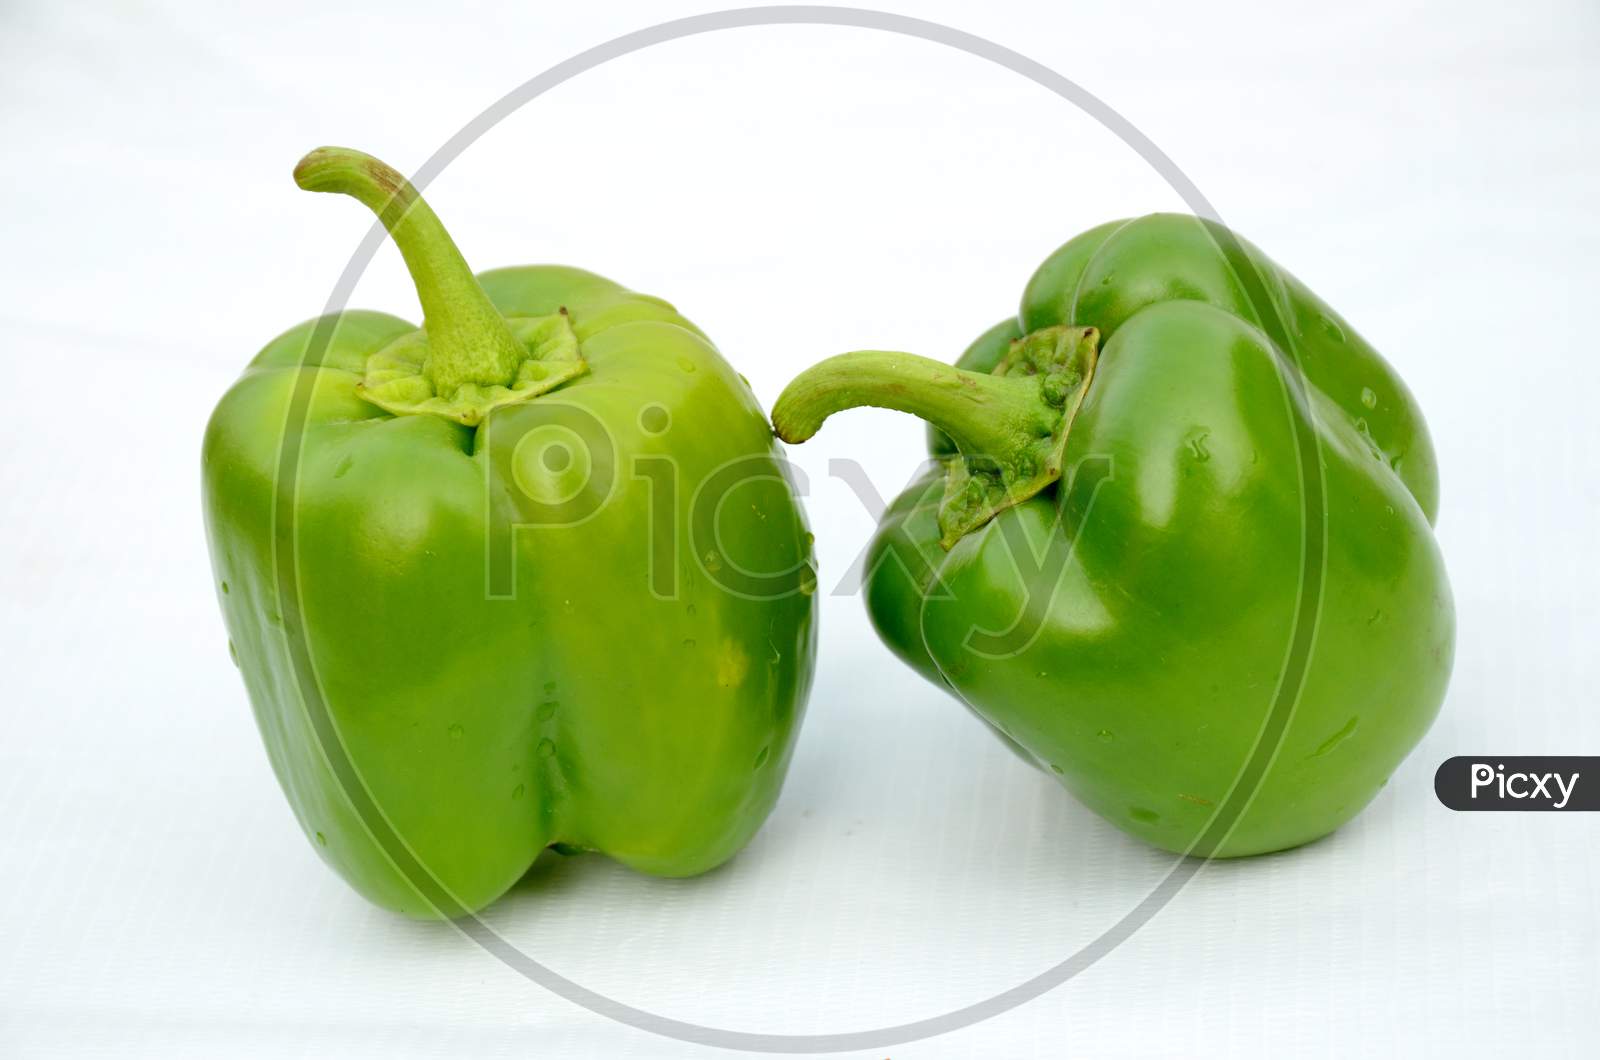 the pair green ripe capsicum  isolated on white background